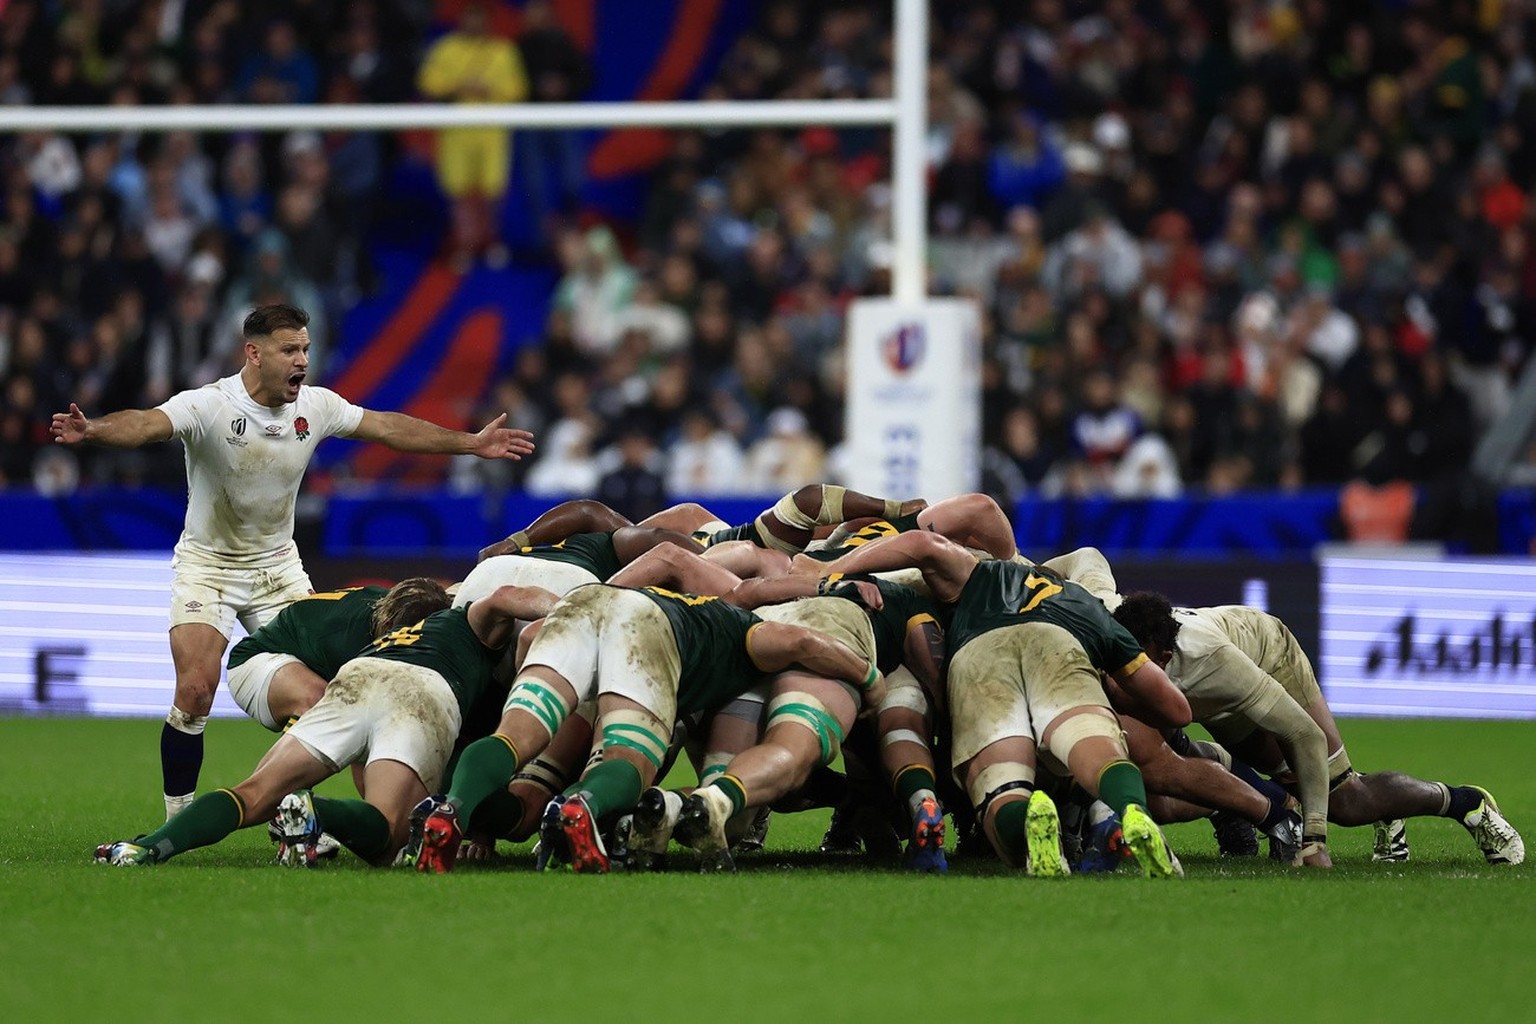 Players contest a scrum during the Rugby World Cup semifinal match between England and South Africa at the Stade de France in Saint-Denis, near Paris, Saturday, Oct. 21, 2023. (AP Photo/Aurelien Moris ...